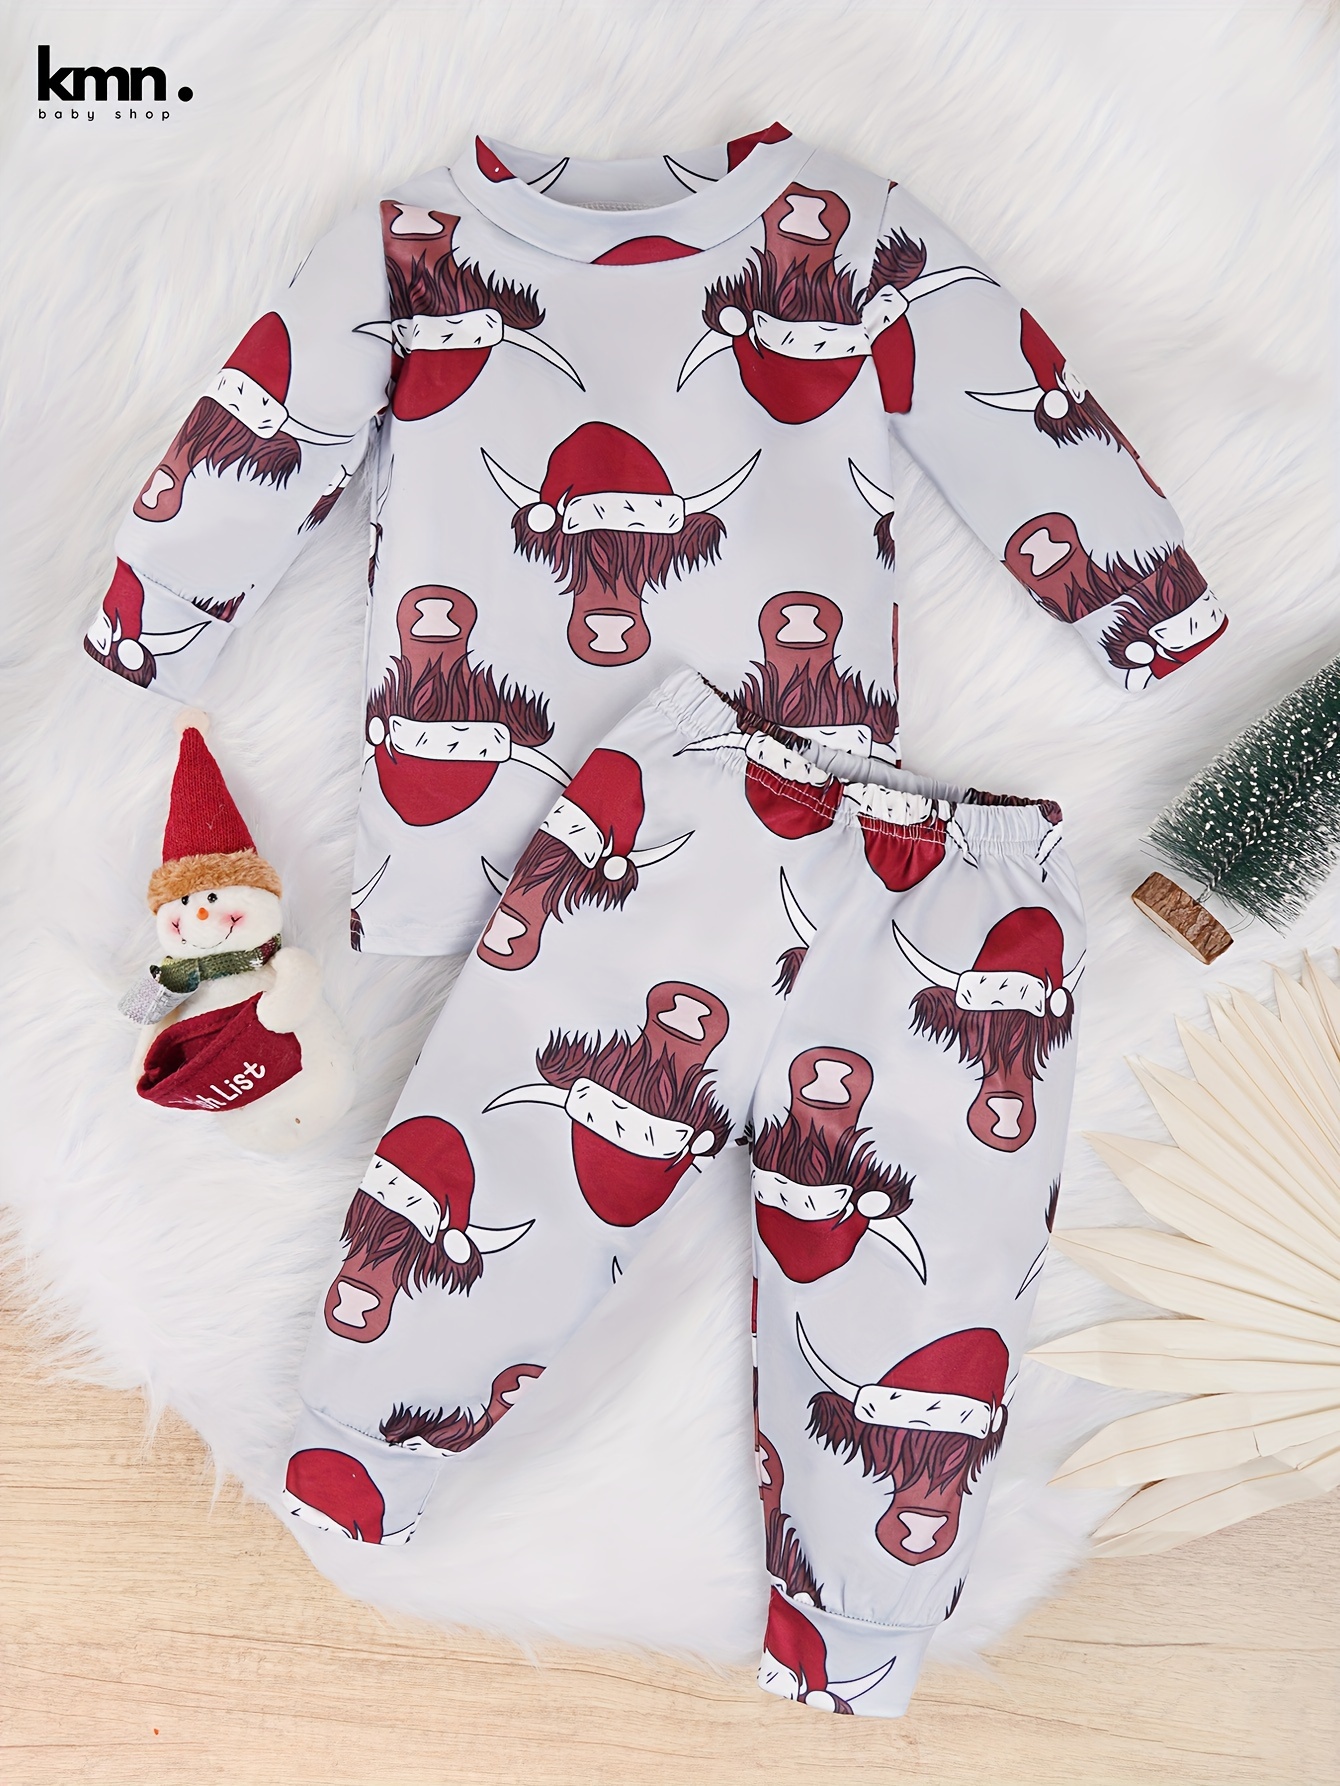 Shop in Canada for Christmas pajamas for kids